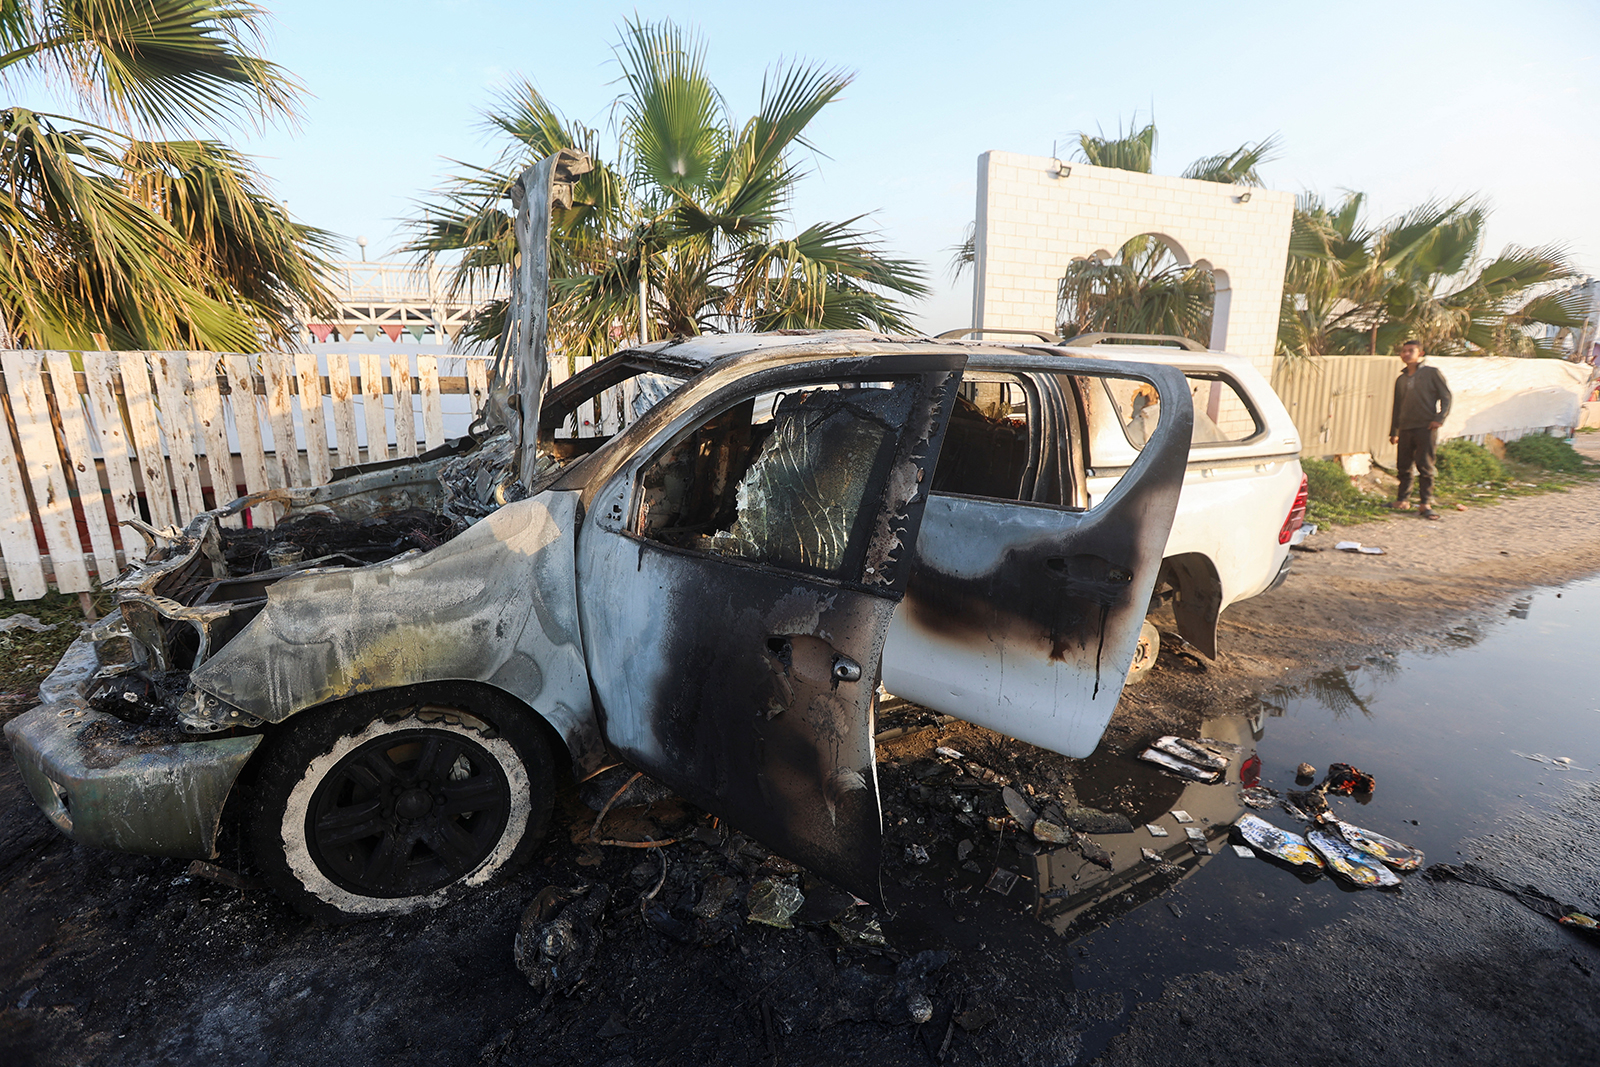 A person looks at a vehicle where employees from the World Central Kitchen (WCK), including foreigners, were killed in an Israeli airstrike, in Deir Al-Balah, Gaza, on April 2.